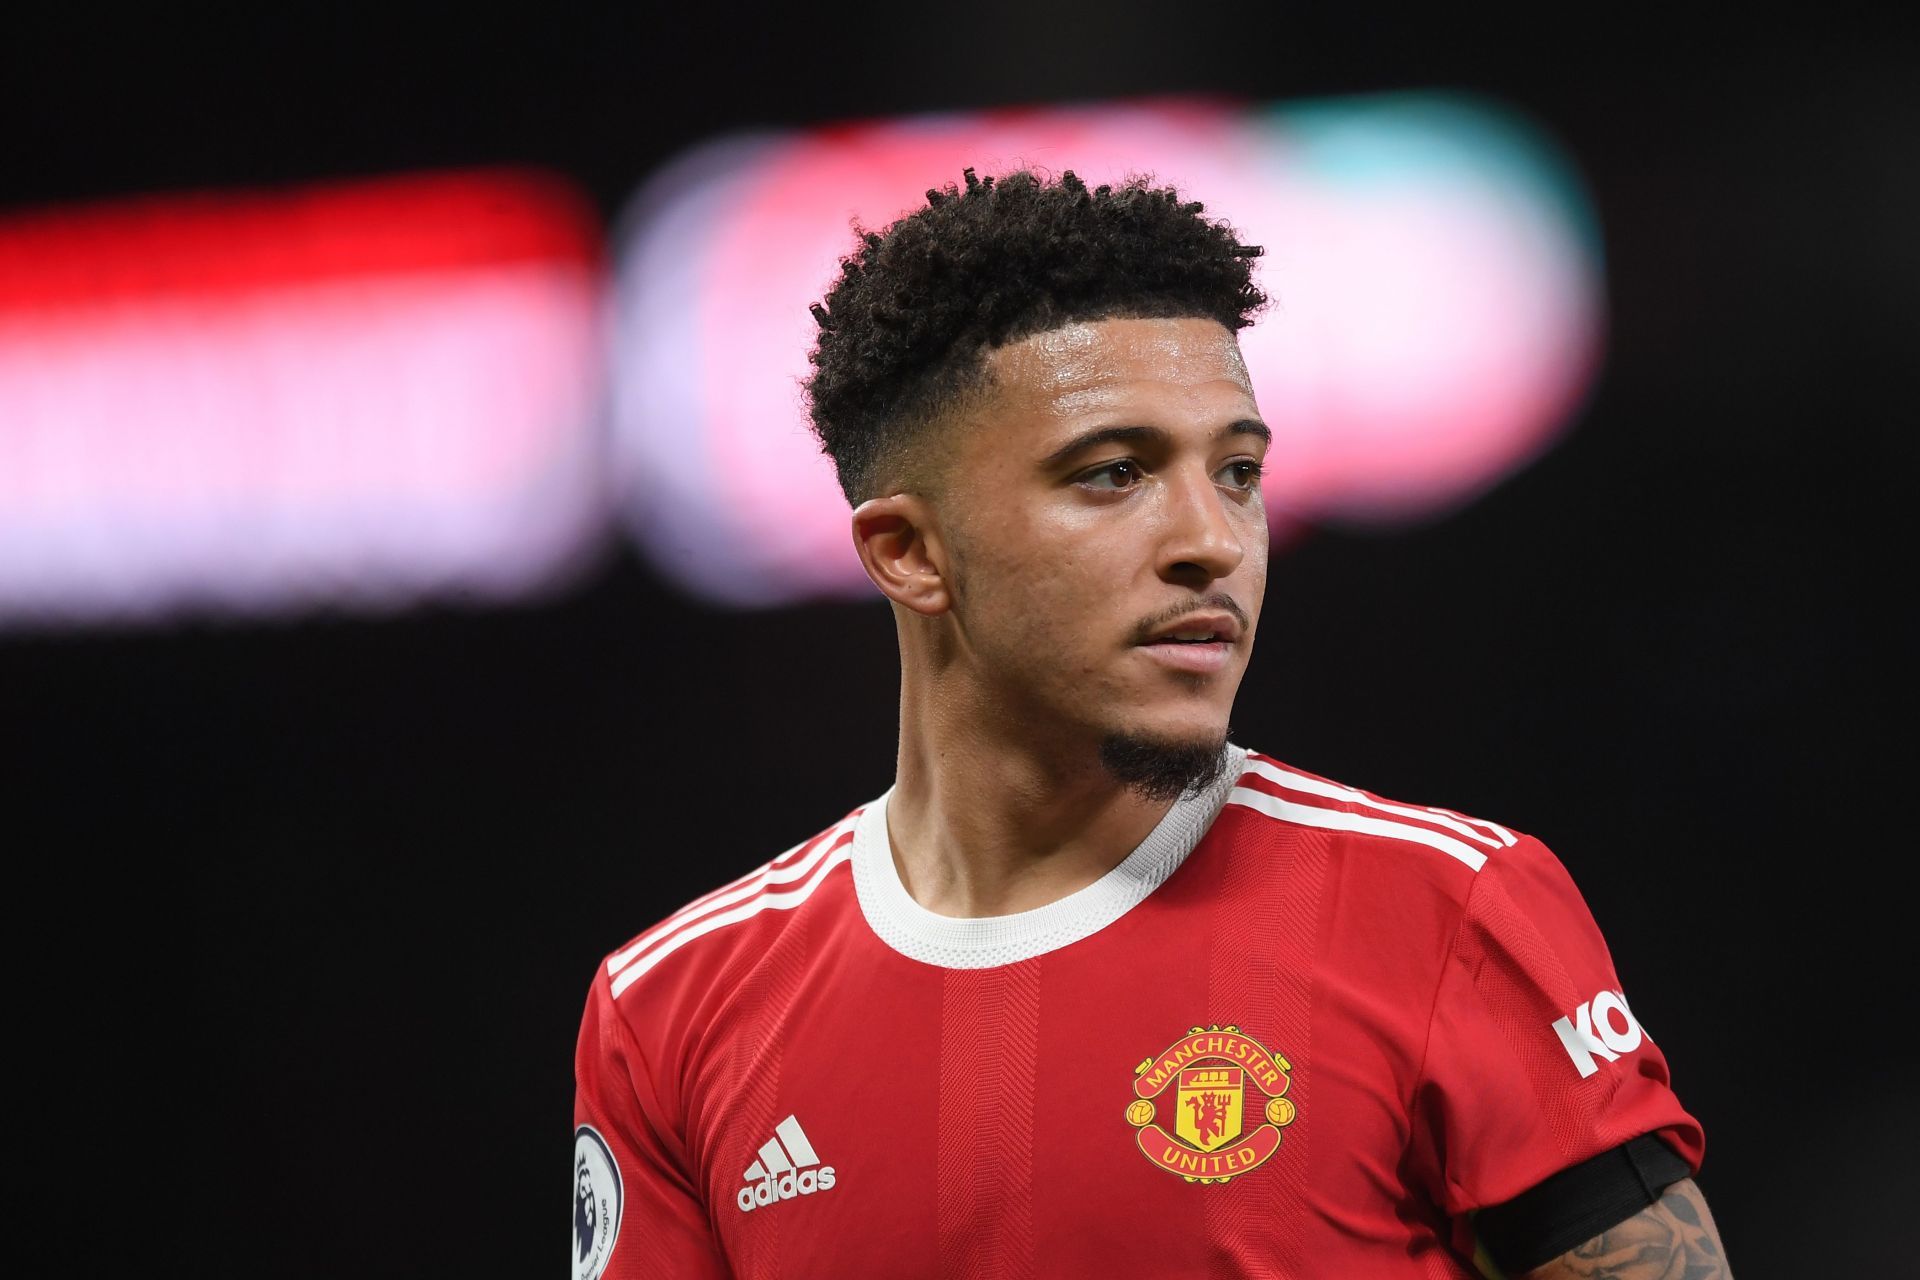 Jadon Sancho has already set the precedent by moving to Manchester United.